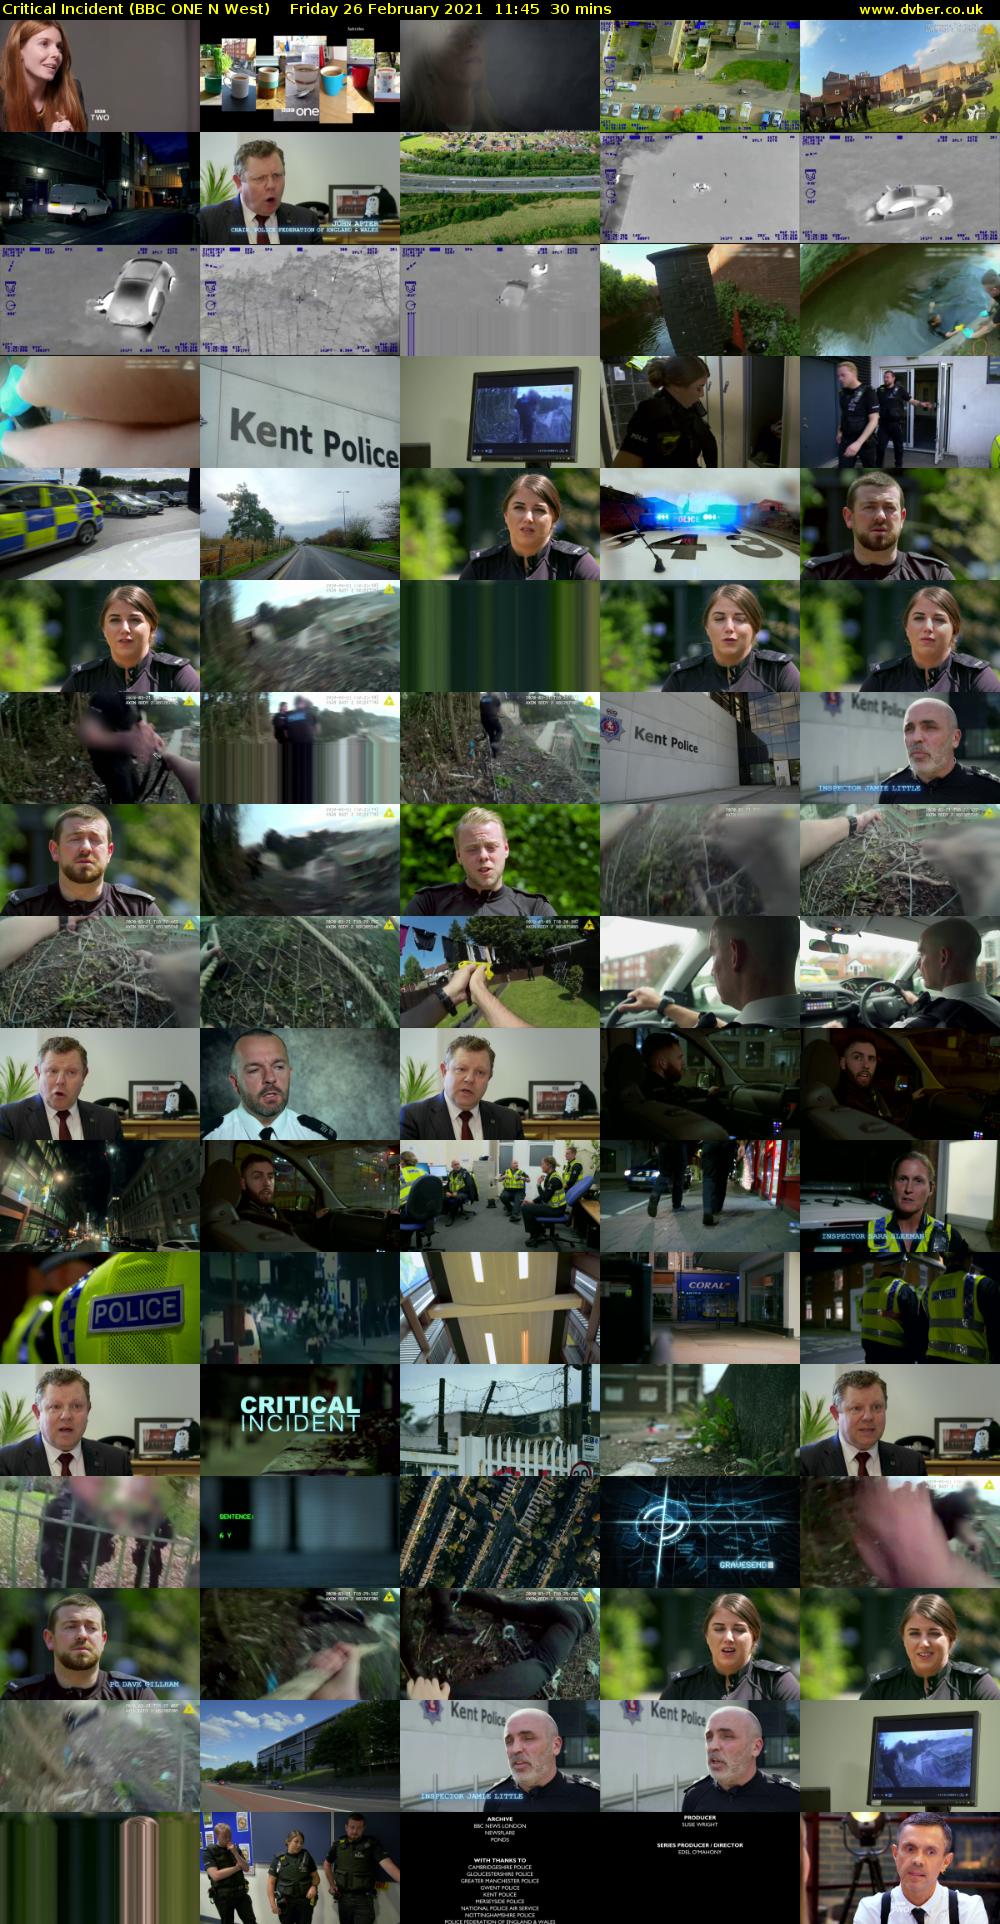 Critical Incident (BBC ONE N West) Friday 26 February 2021 11:45 - 12:15